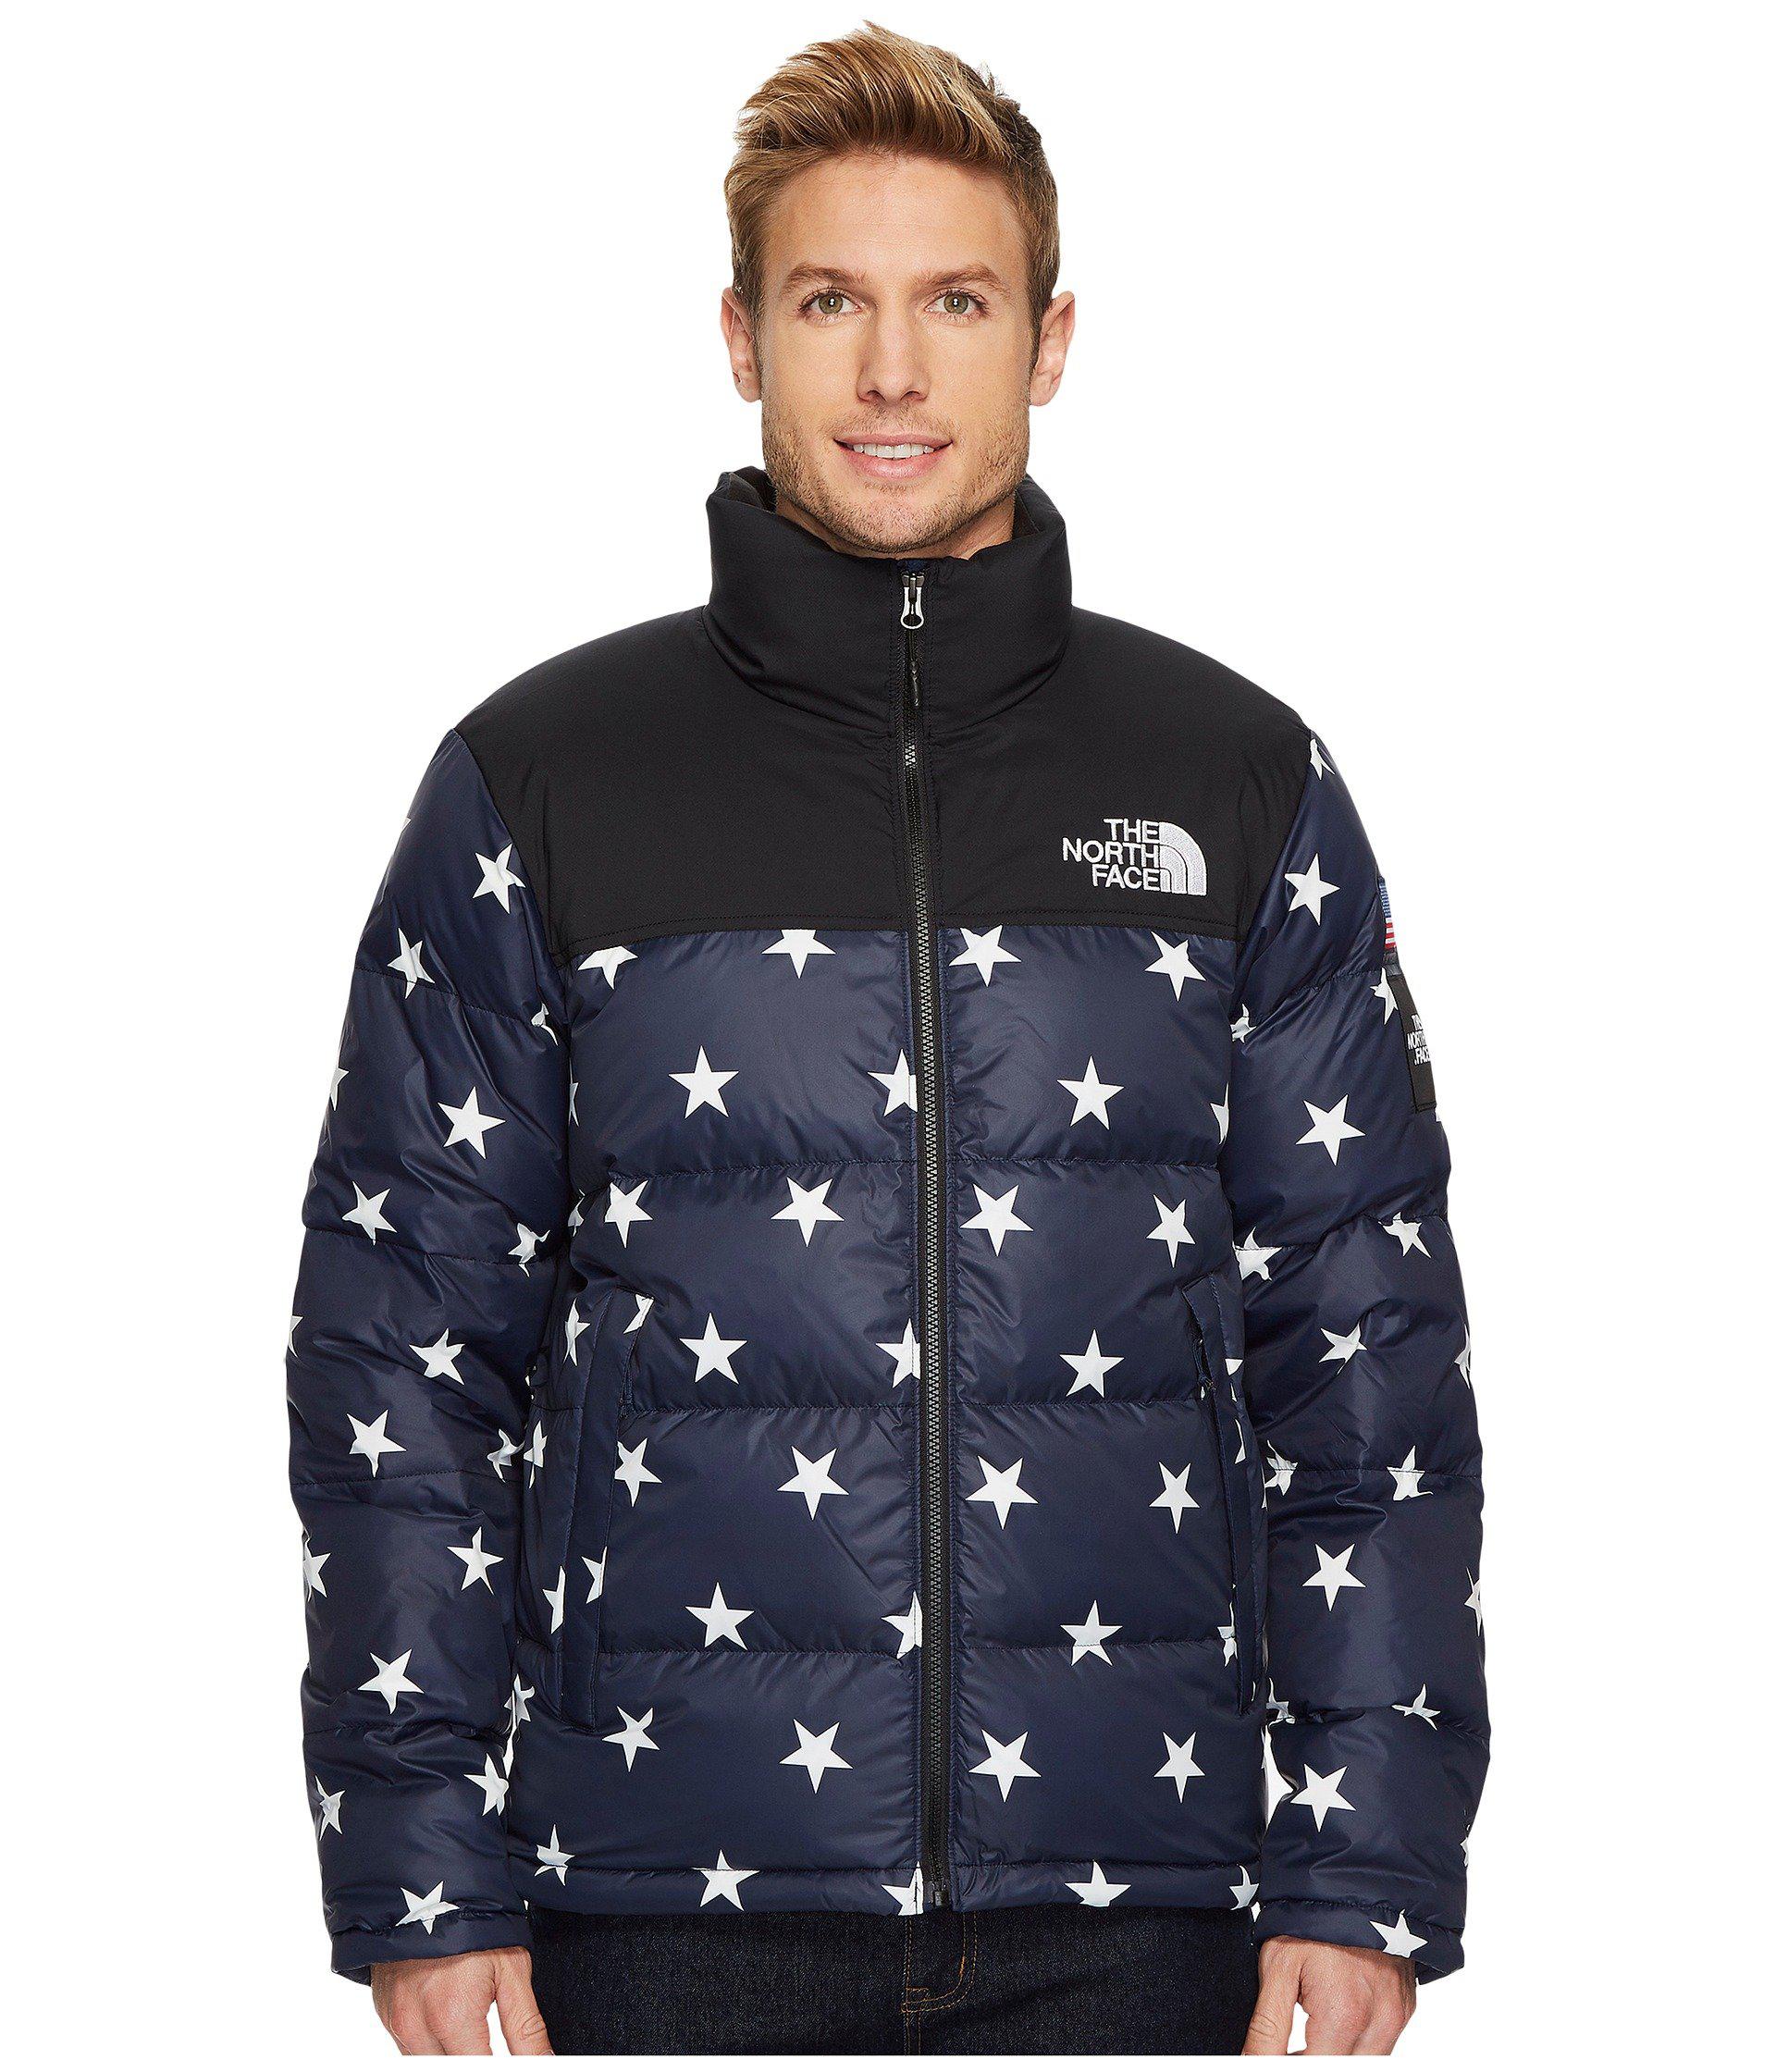 the north face stars jacket